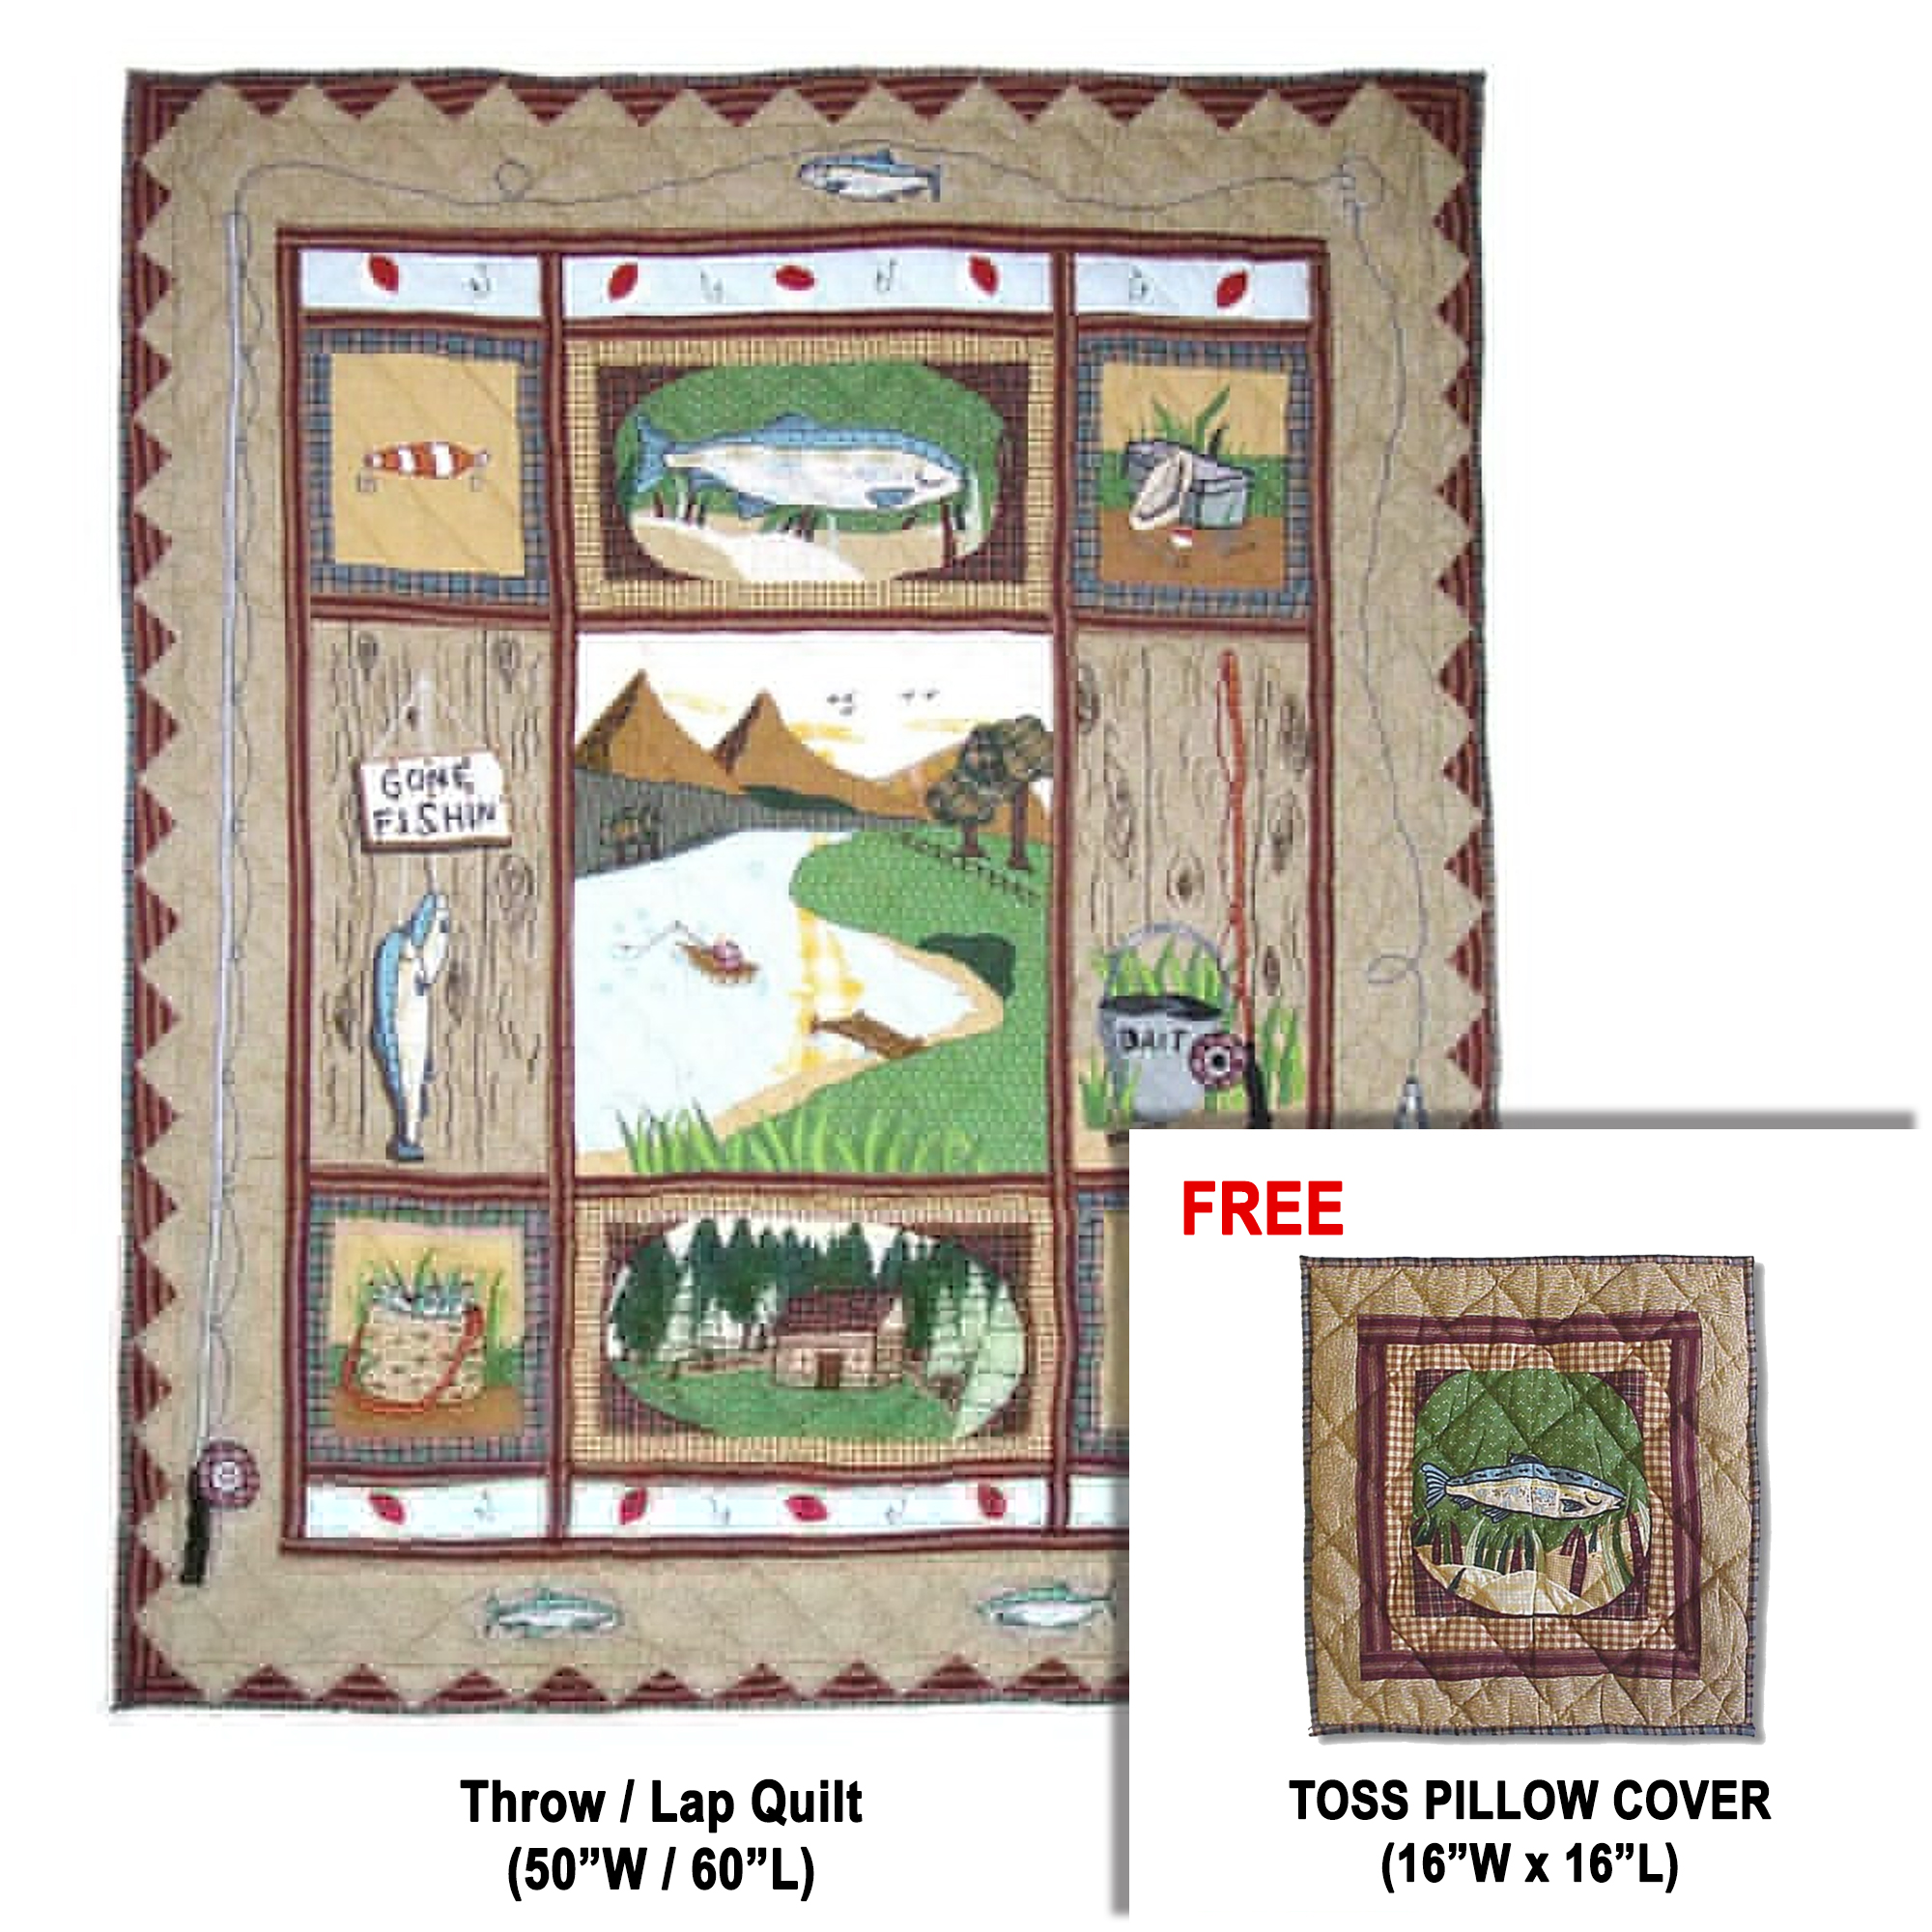 Gone Fishing Throw 50"W x 60"L | Buy a Throw / lap Quilt and Get a matching Toss Pillow Cover (16"W x 16"L) FREE